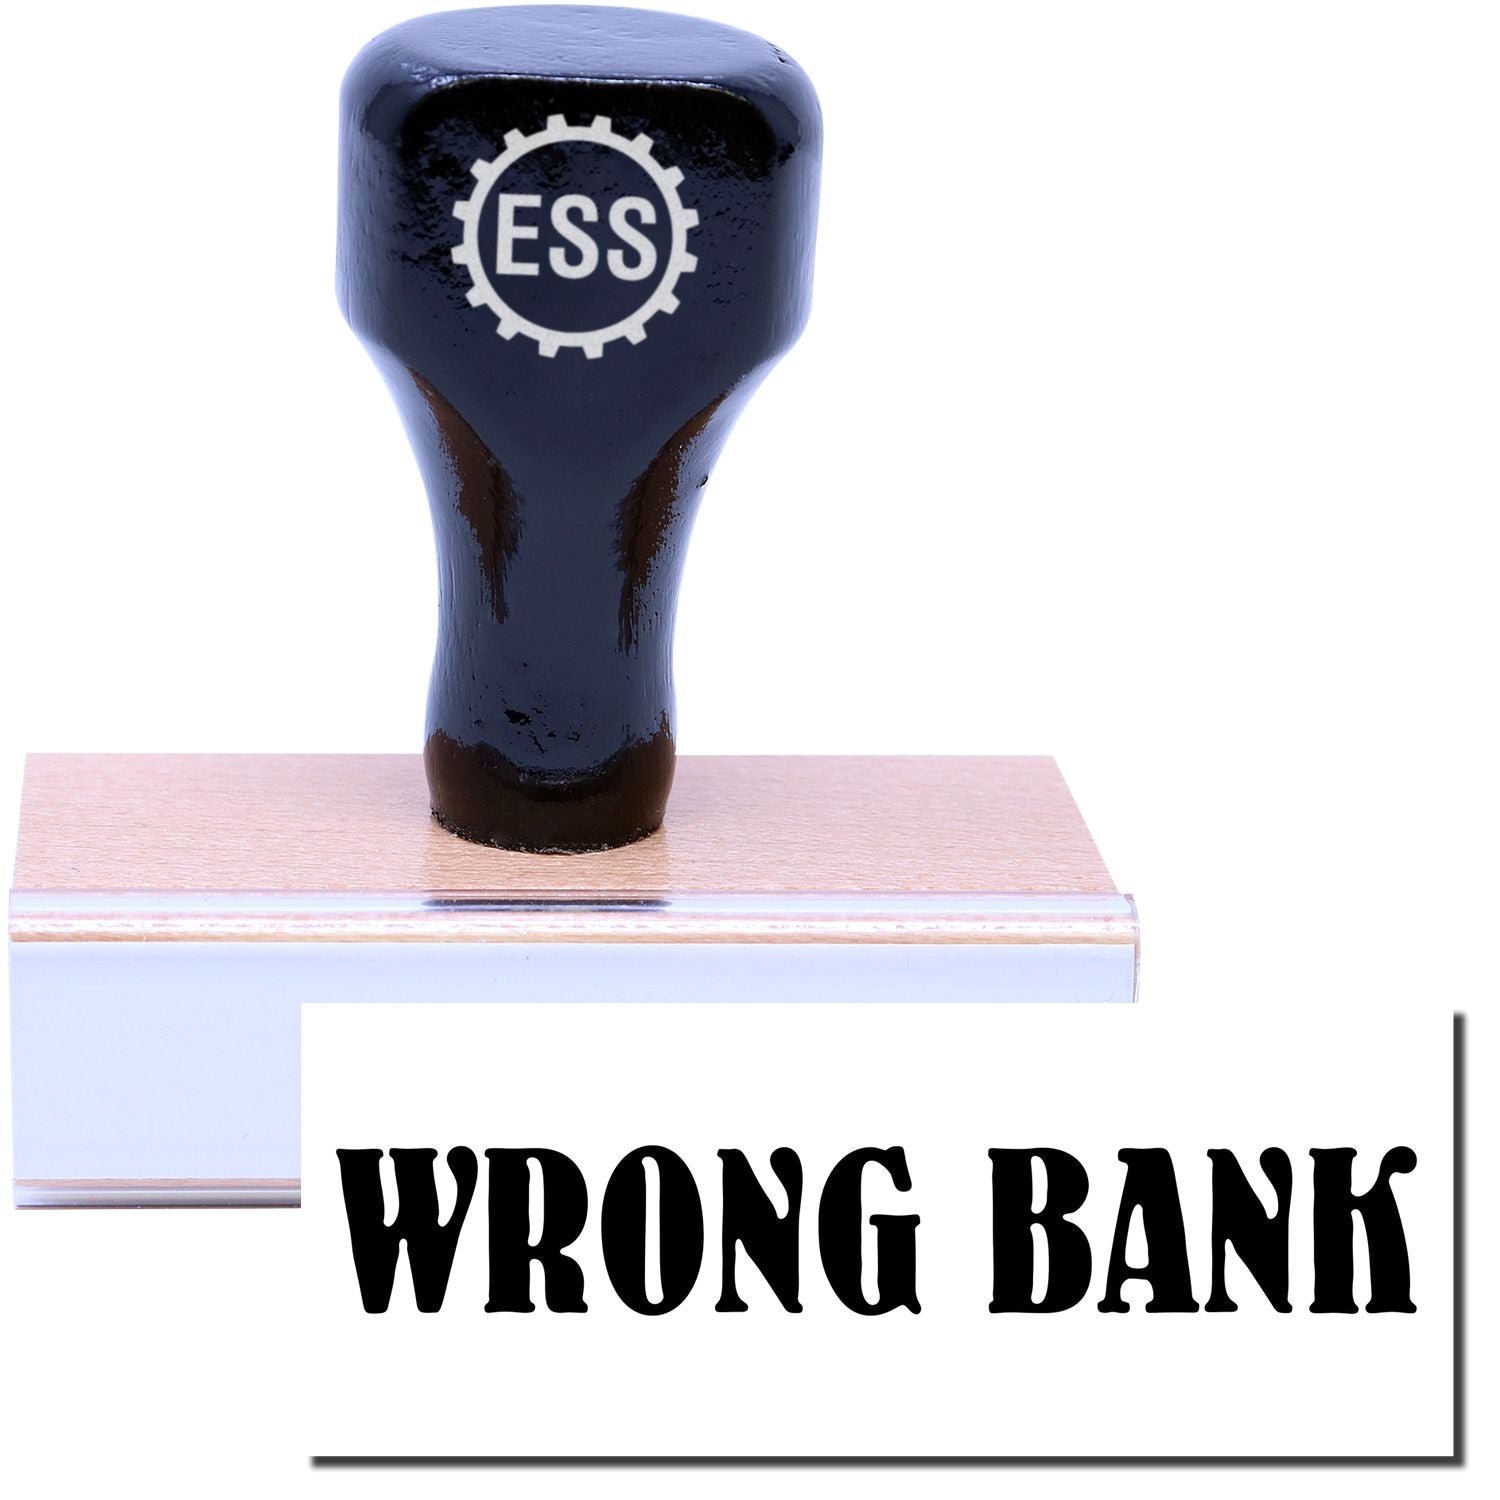 A stock office rubber stamp with a stamped image showing how the text "WRONG BANK" is displayed after stamping.